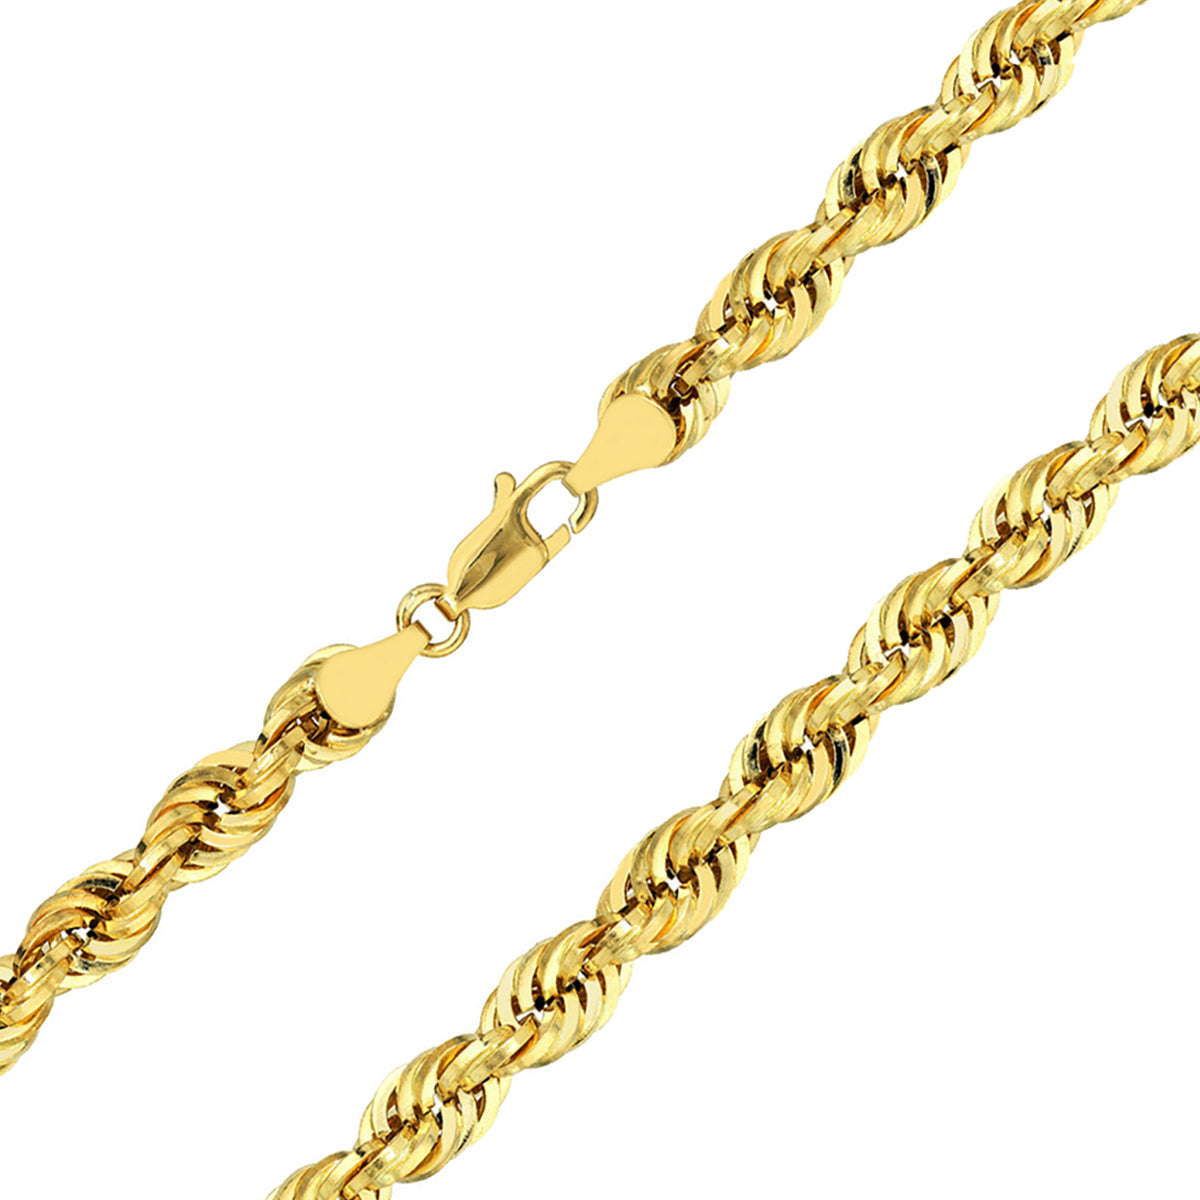 14k Yellow Gold Hollow 8mm Rope Chain Necklace with Lobster Lock - Light Rope Chain with Diamond Cut